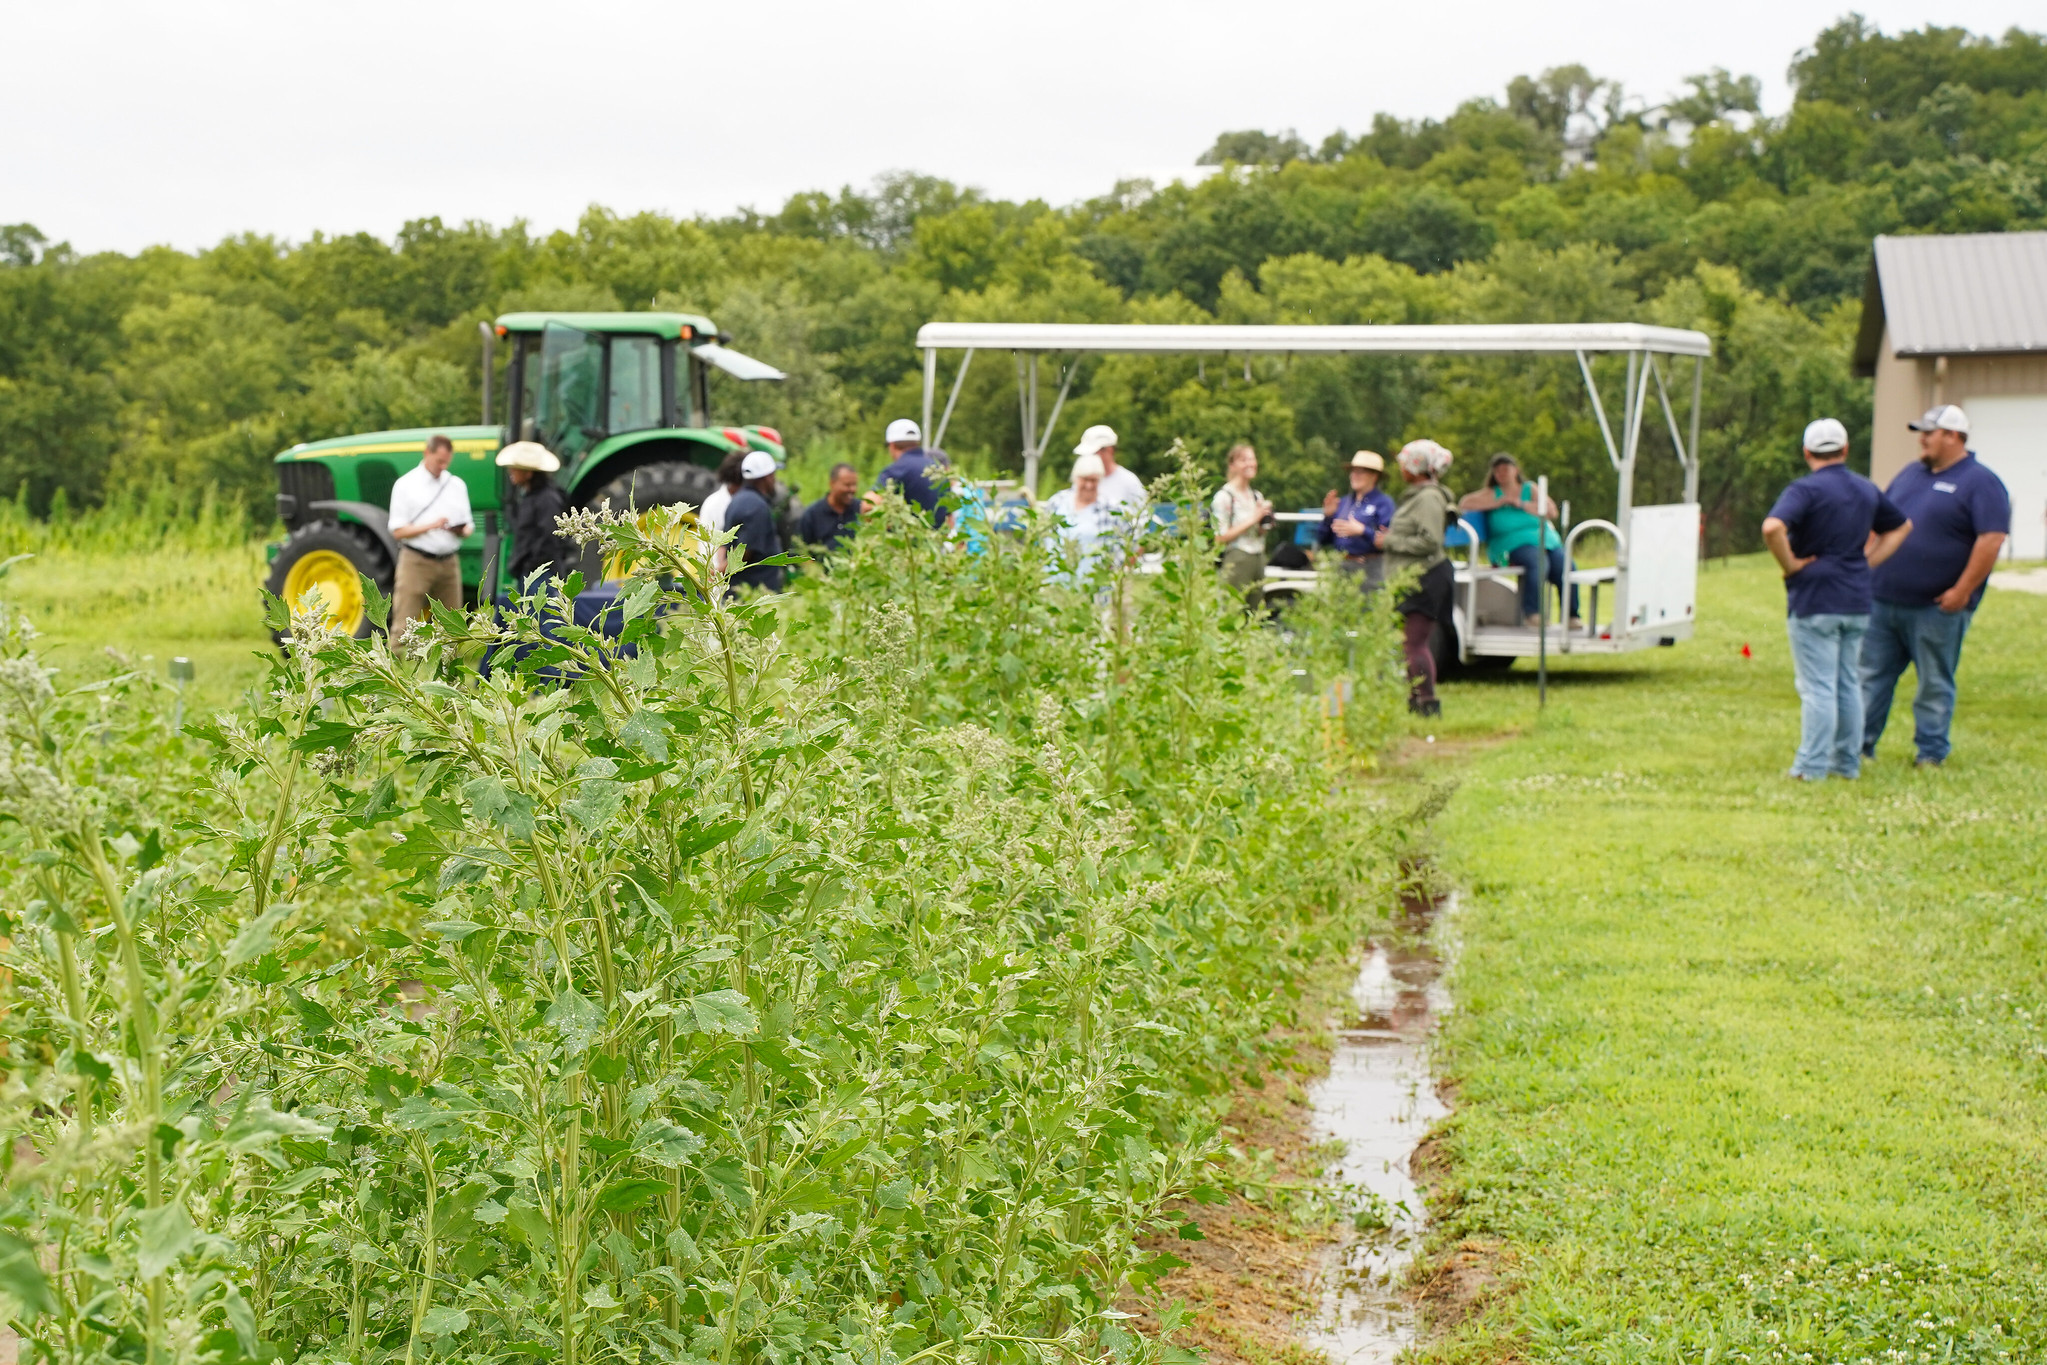 Attendees enjoy a trolley ride to the quinoa fields, where they interact with the plant firsthand. 